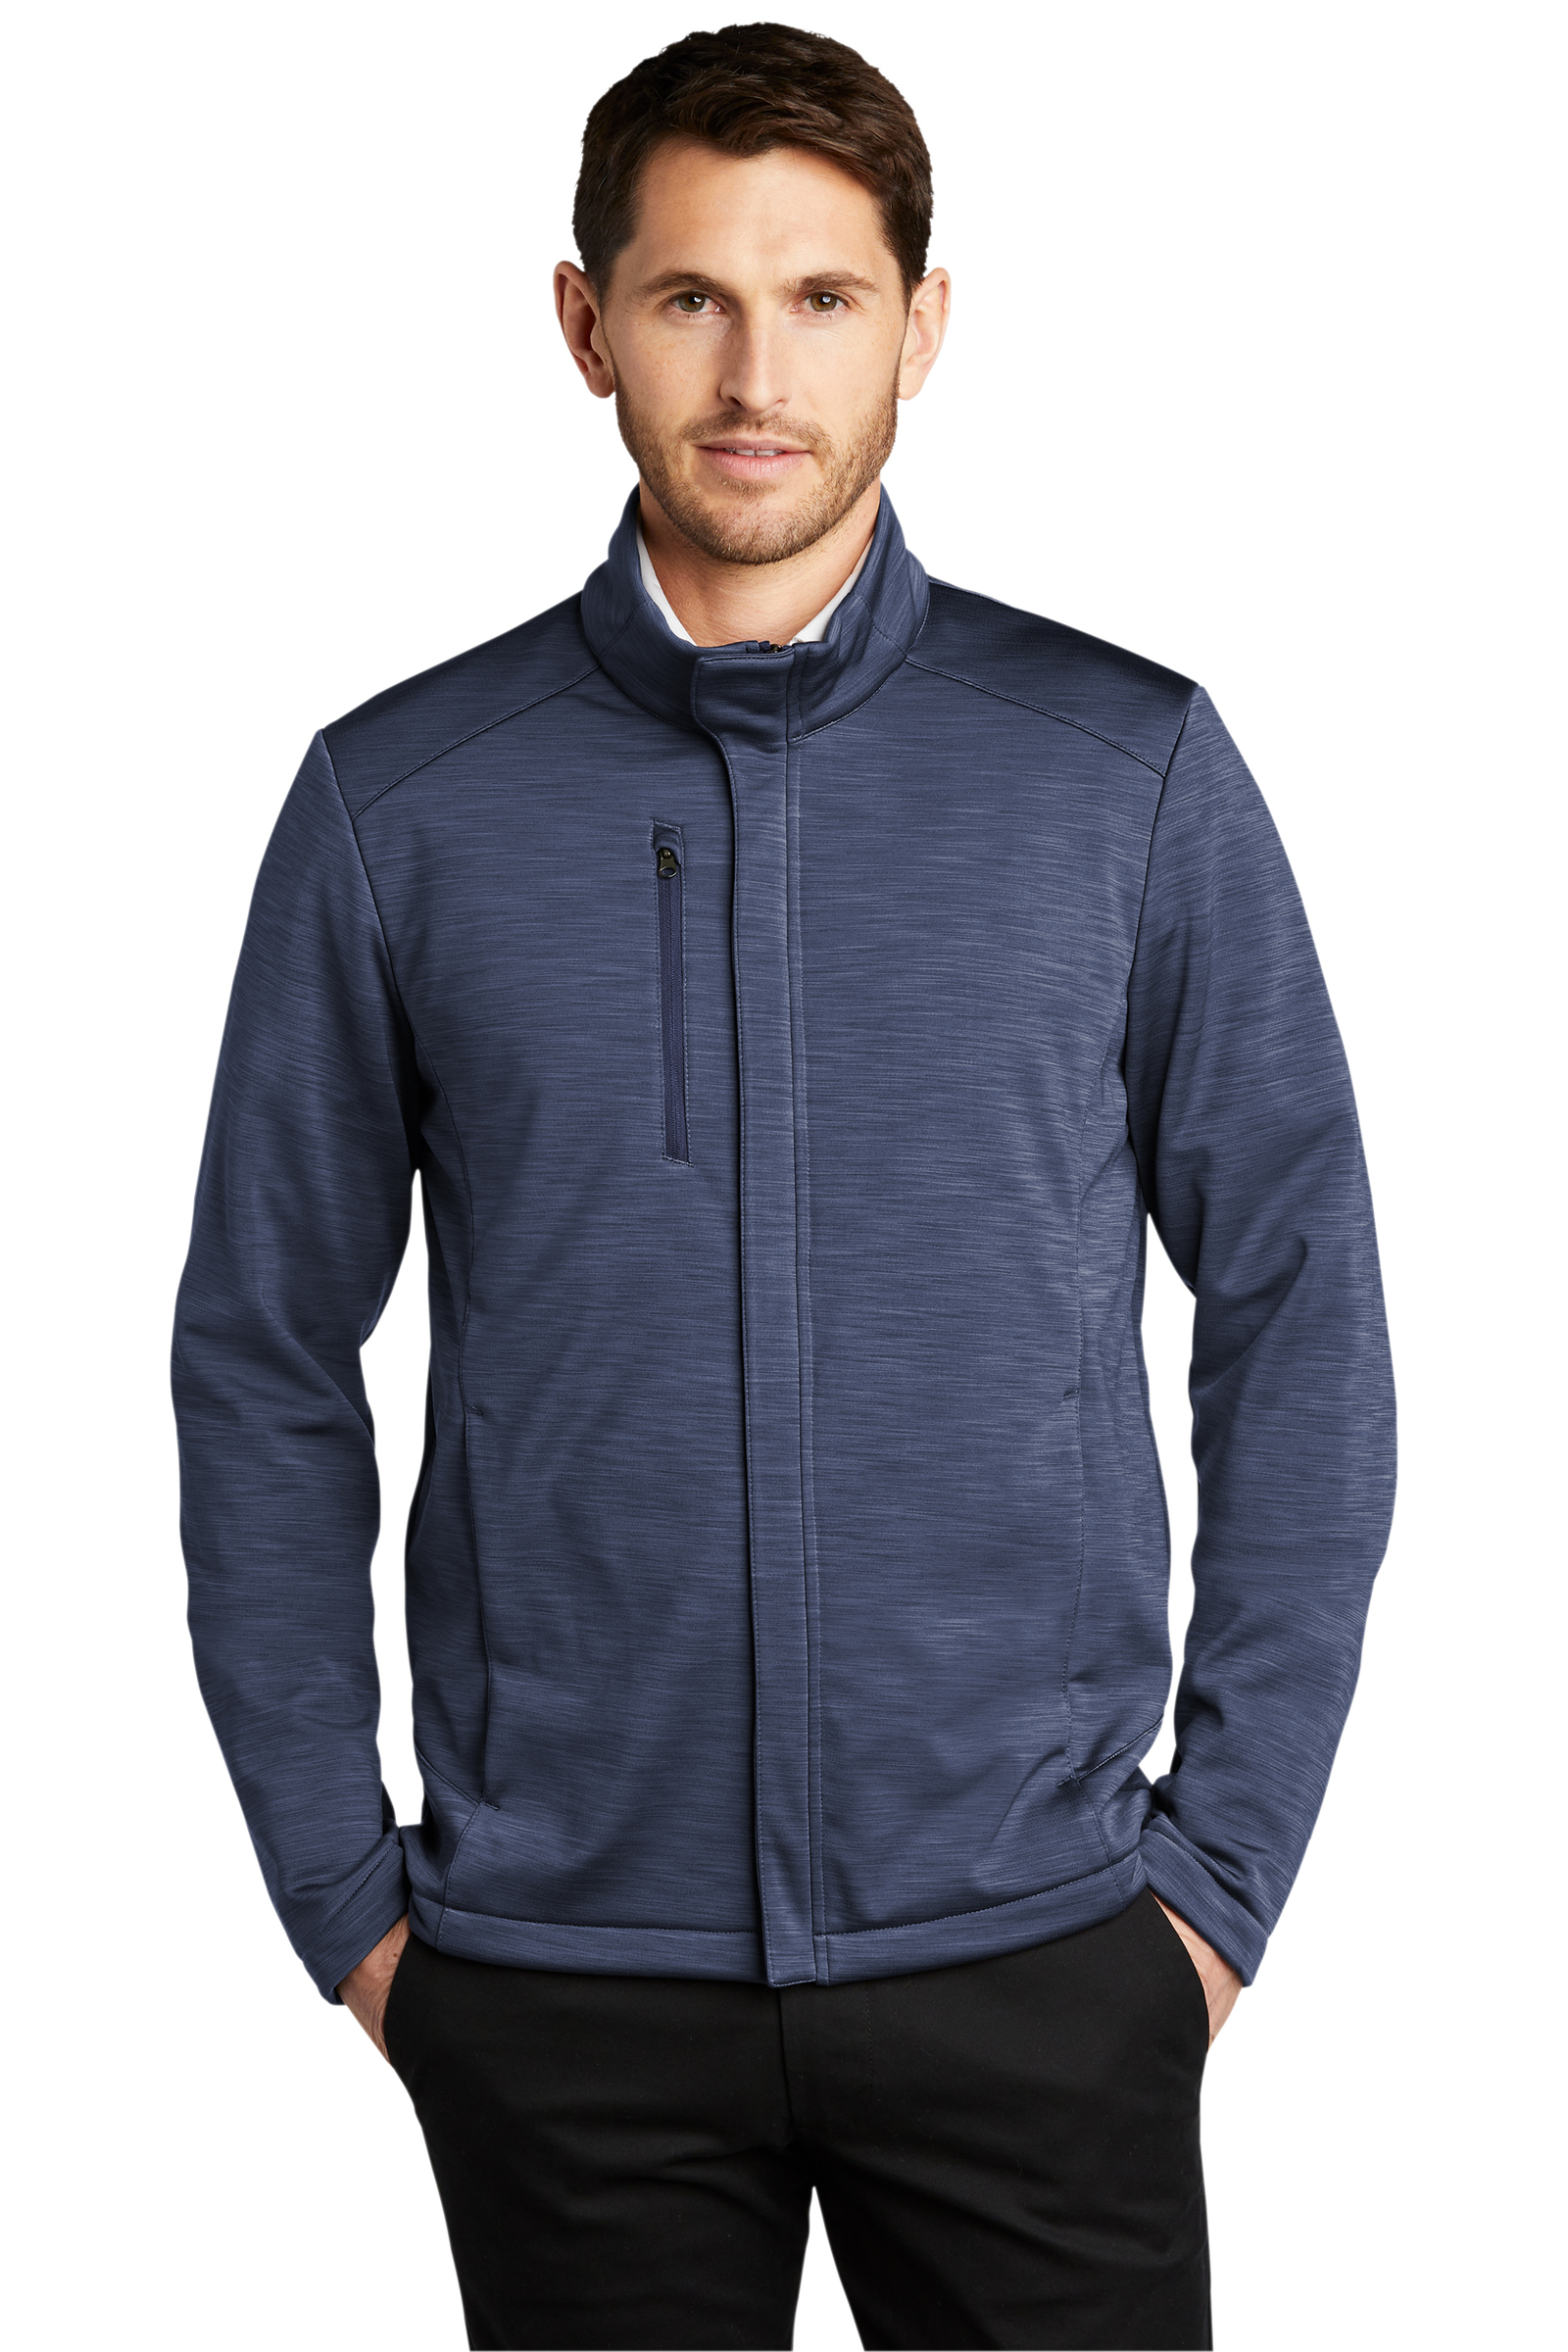 Port Authority Embroidered Men's Stream Soft Shell Jacket